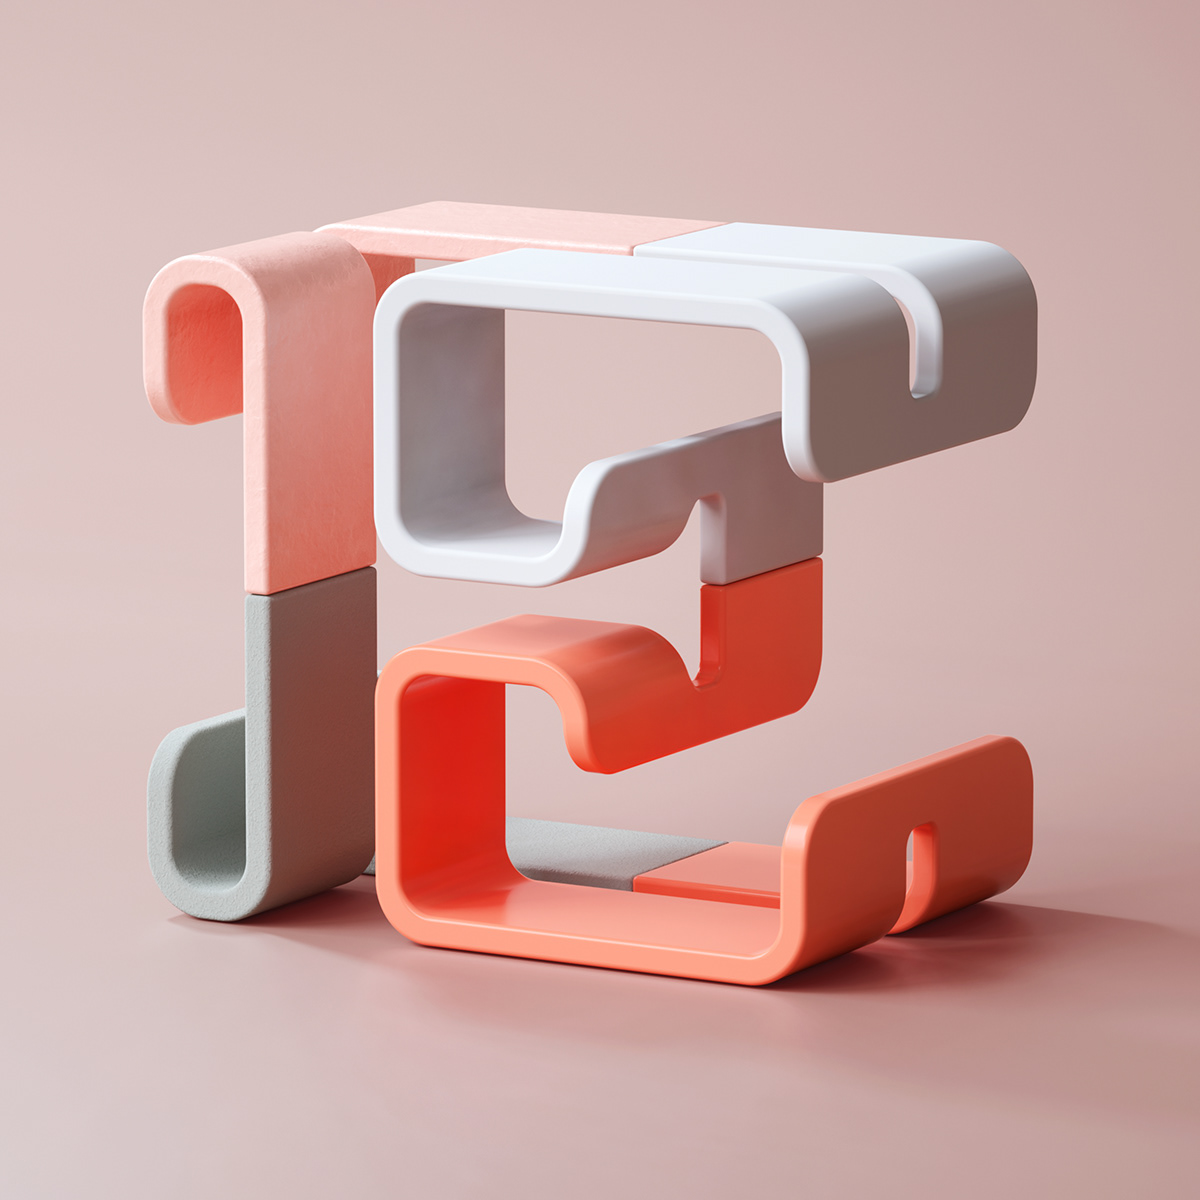 36daysoftype 3D numbers letters alphabets ufho singapore c4d 36days type.